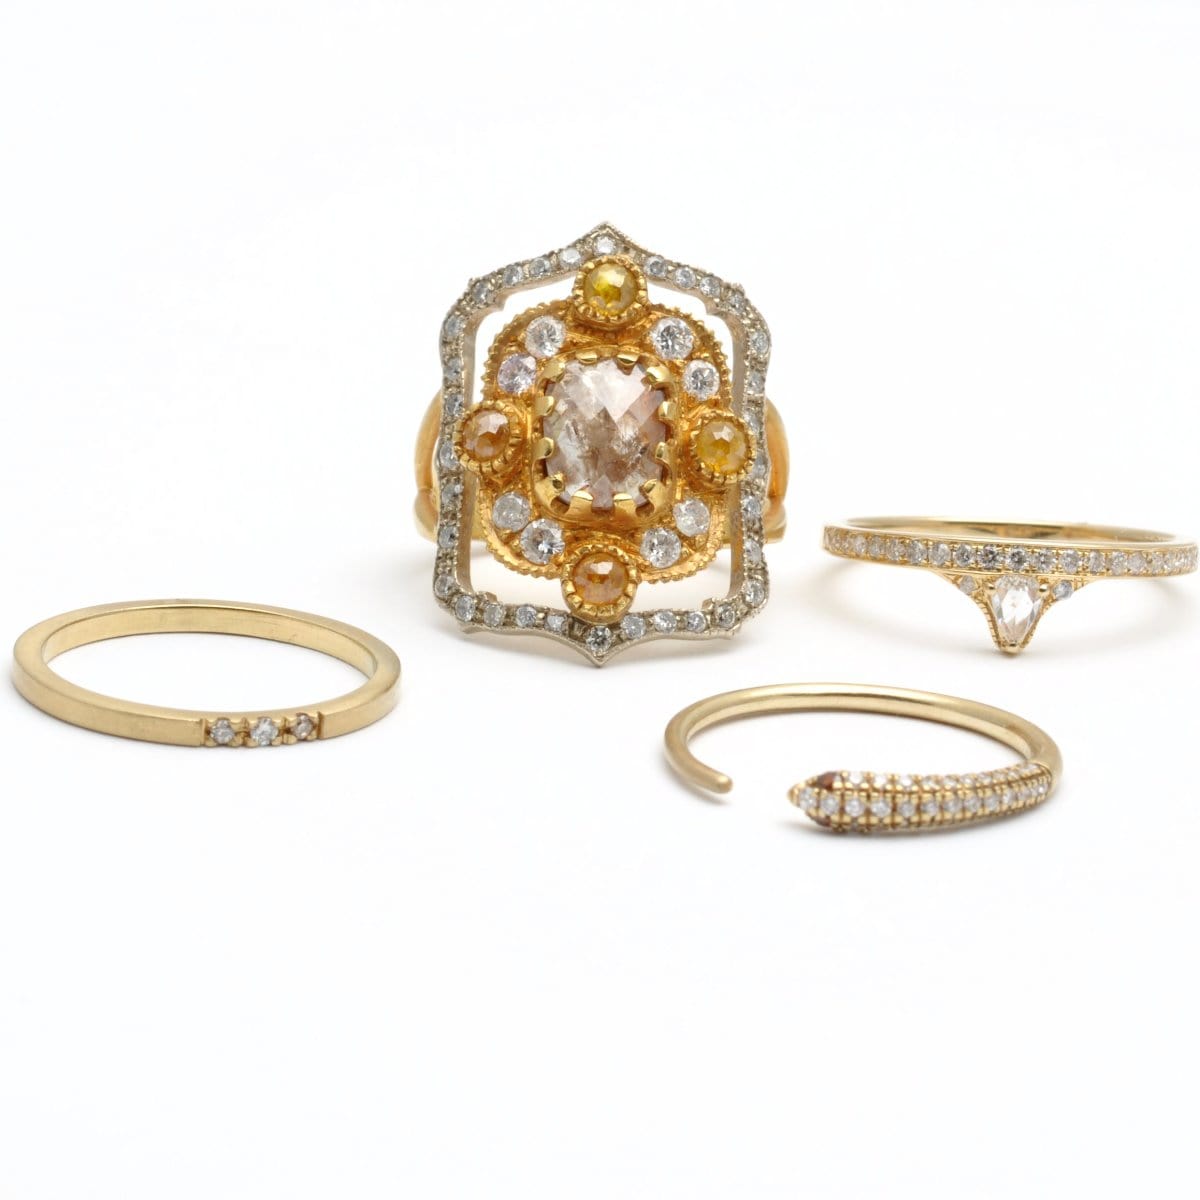 Gold and diamond cocktail ring and stacking rings